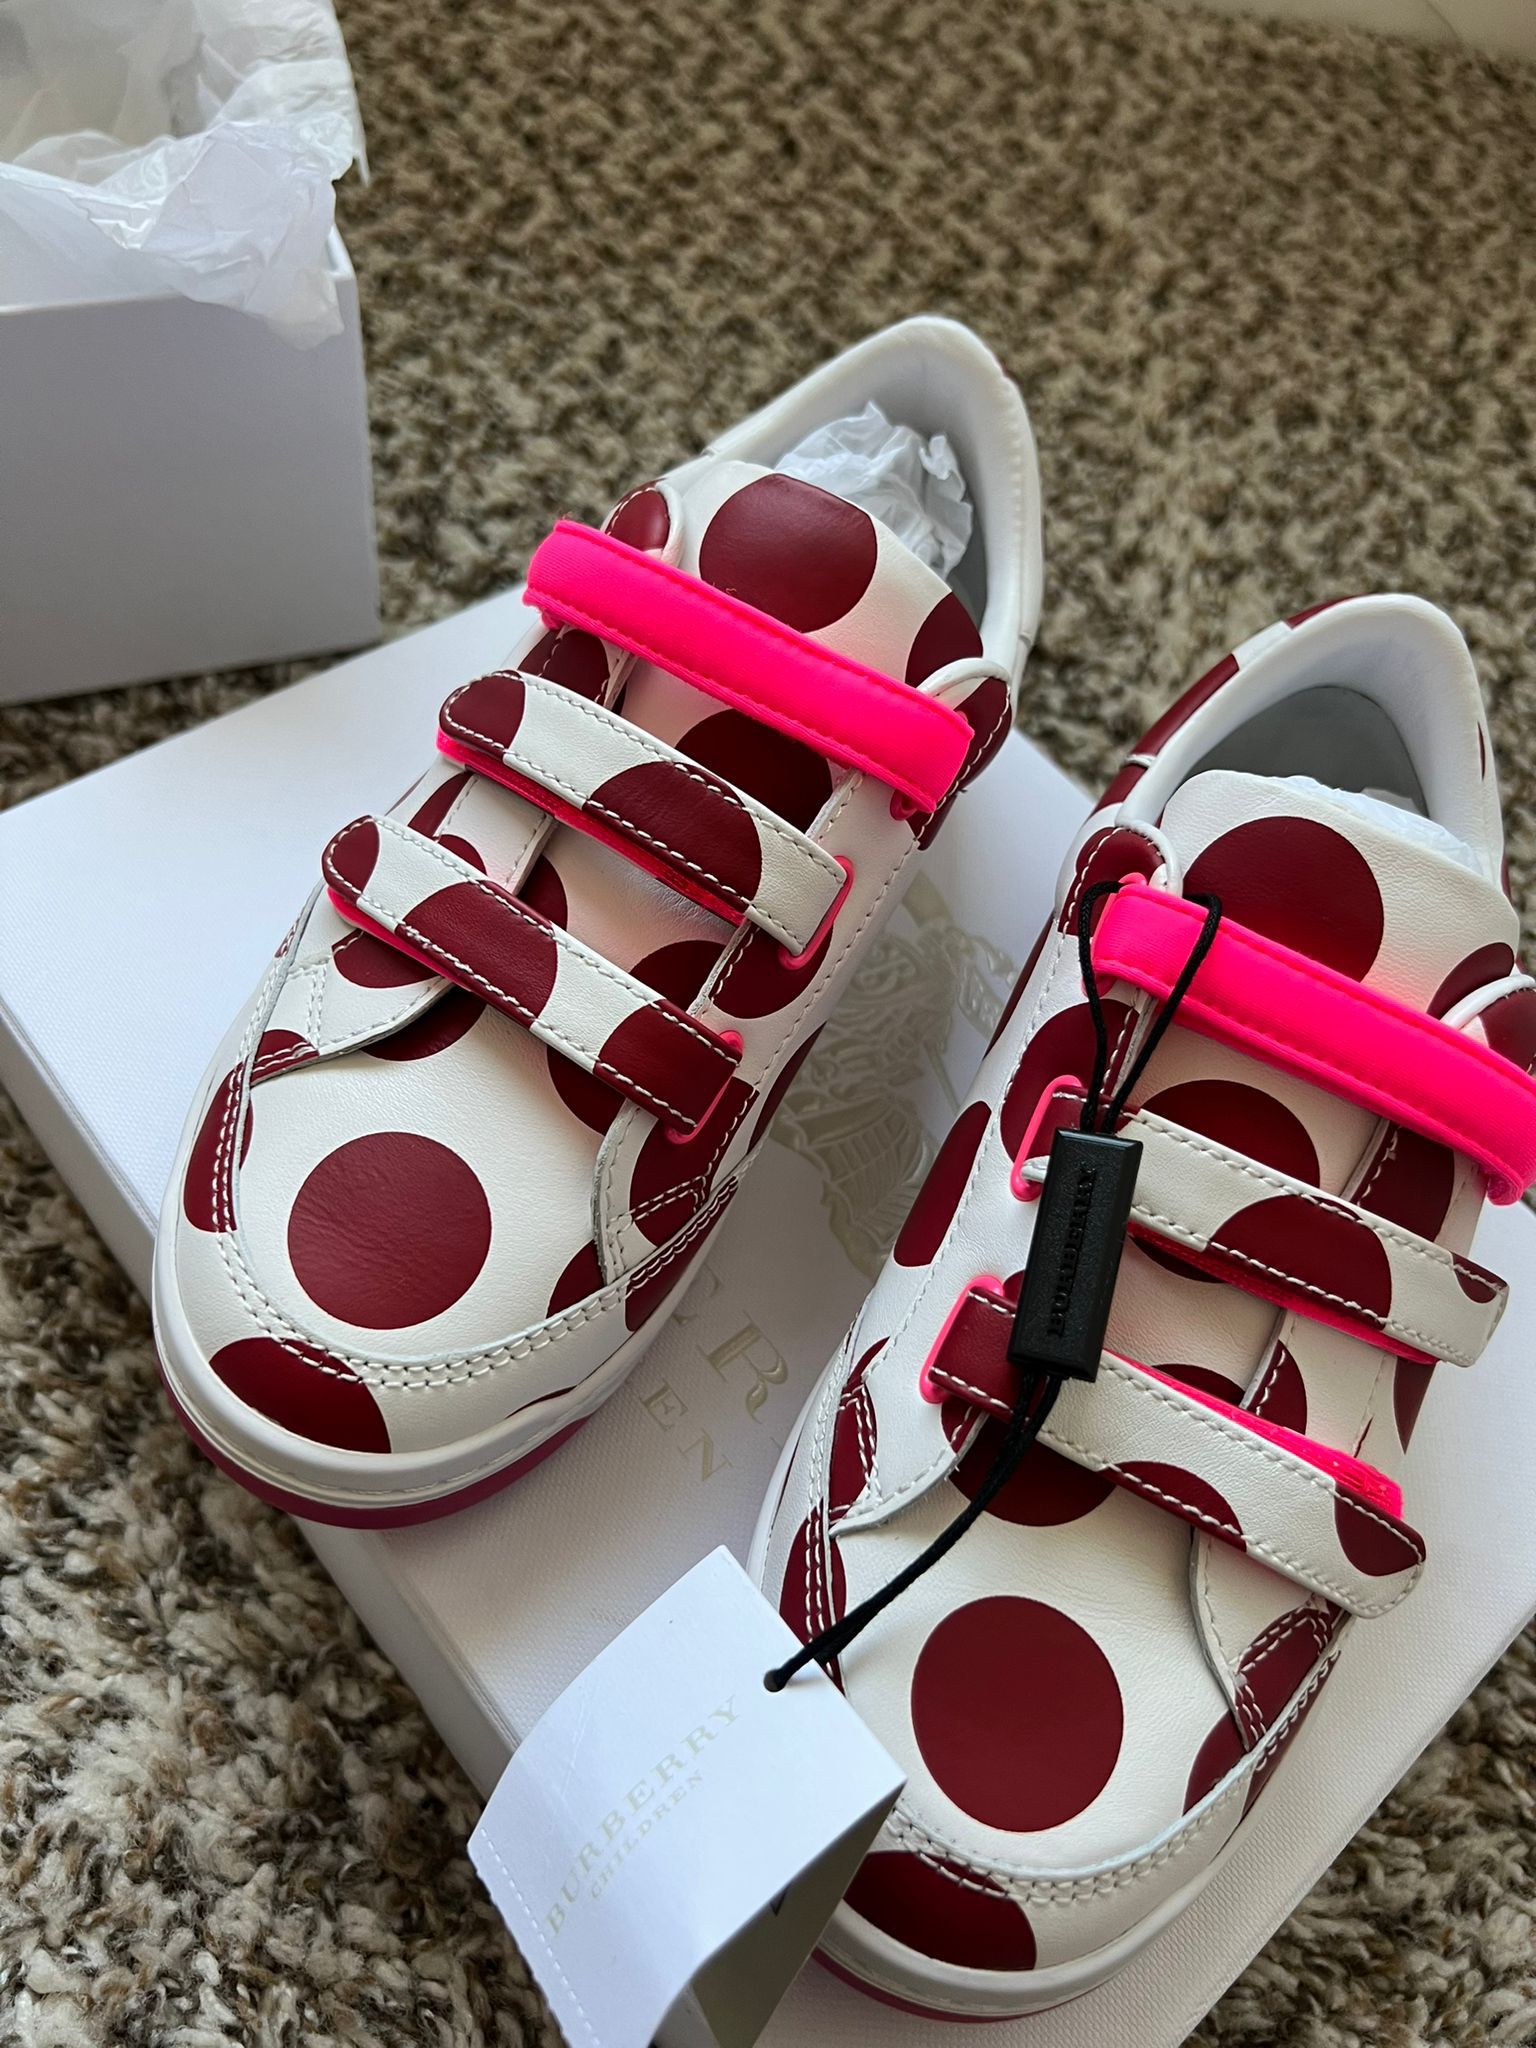 BRAND NEW AUTHENTIC BURBERRY KIDS SNEAKERS SIZE 32 And 33 -$125 Each 